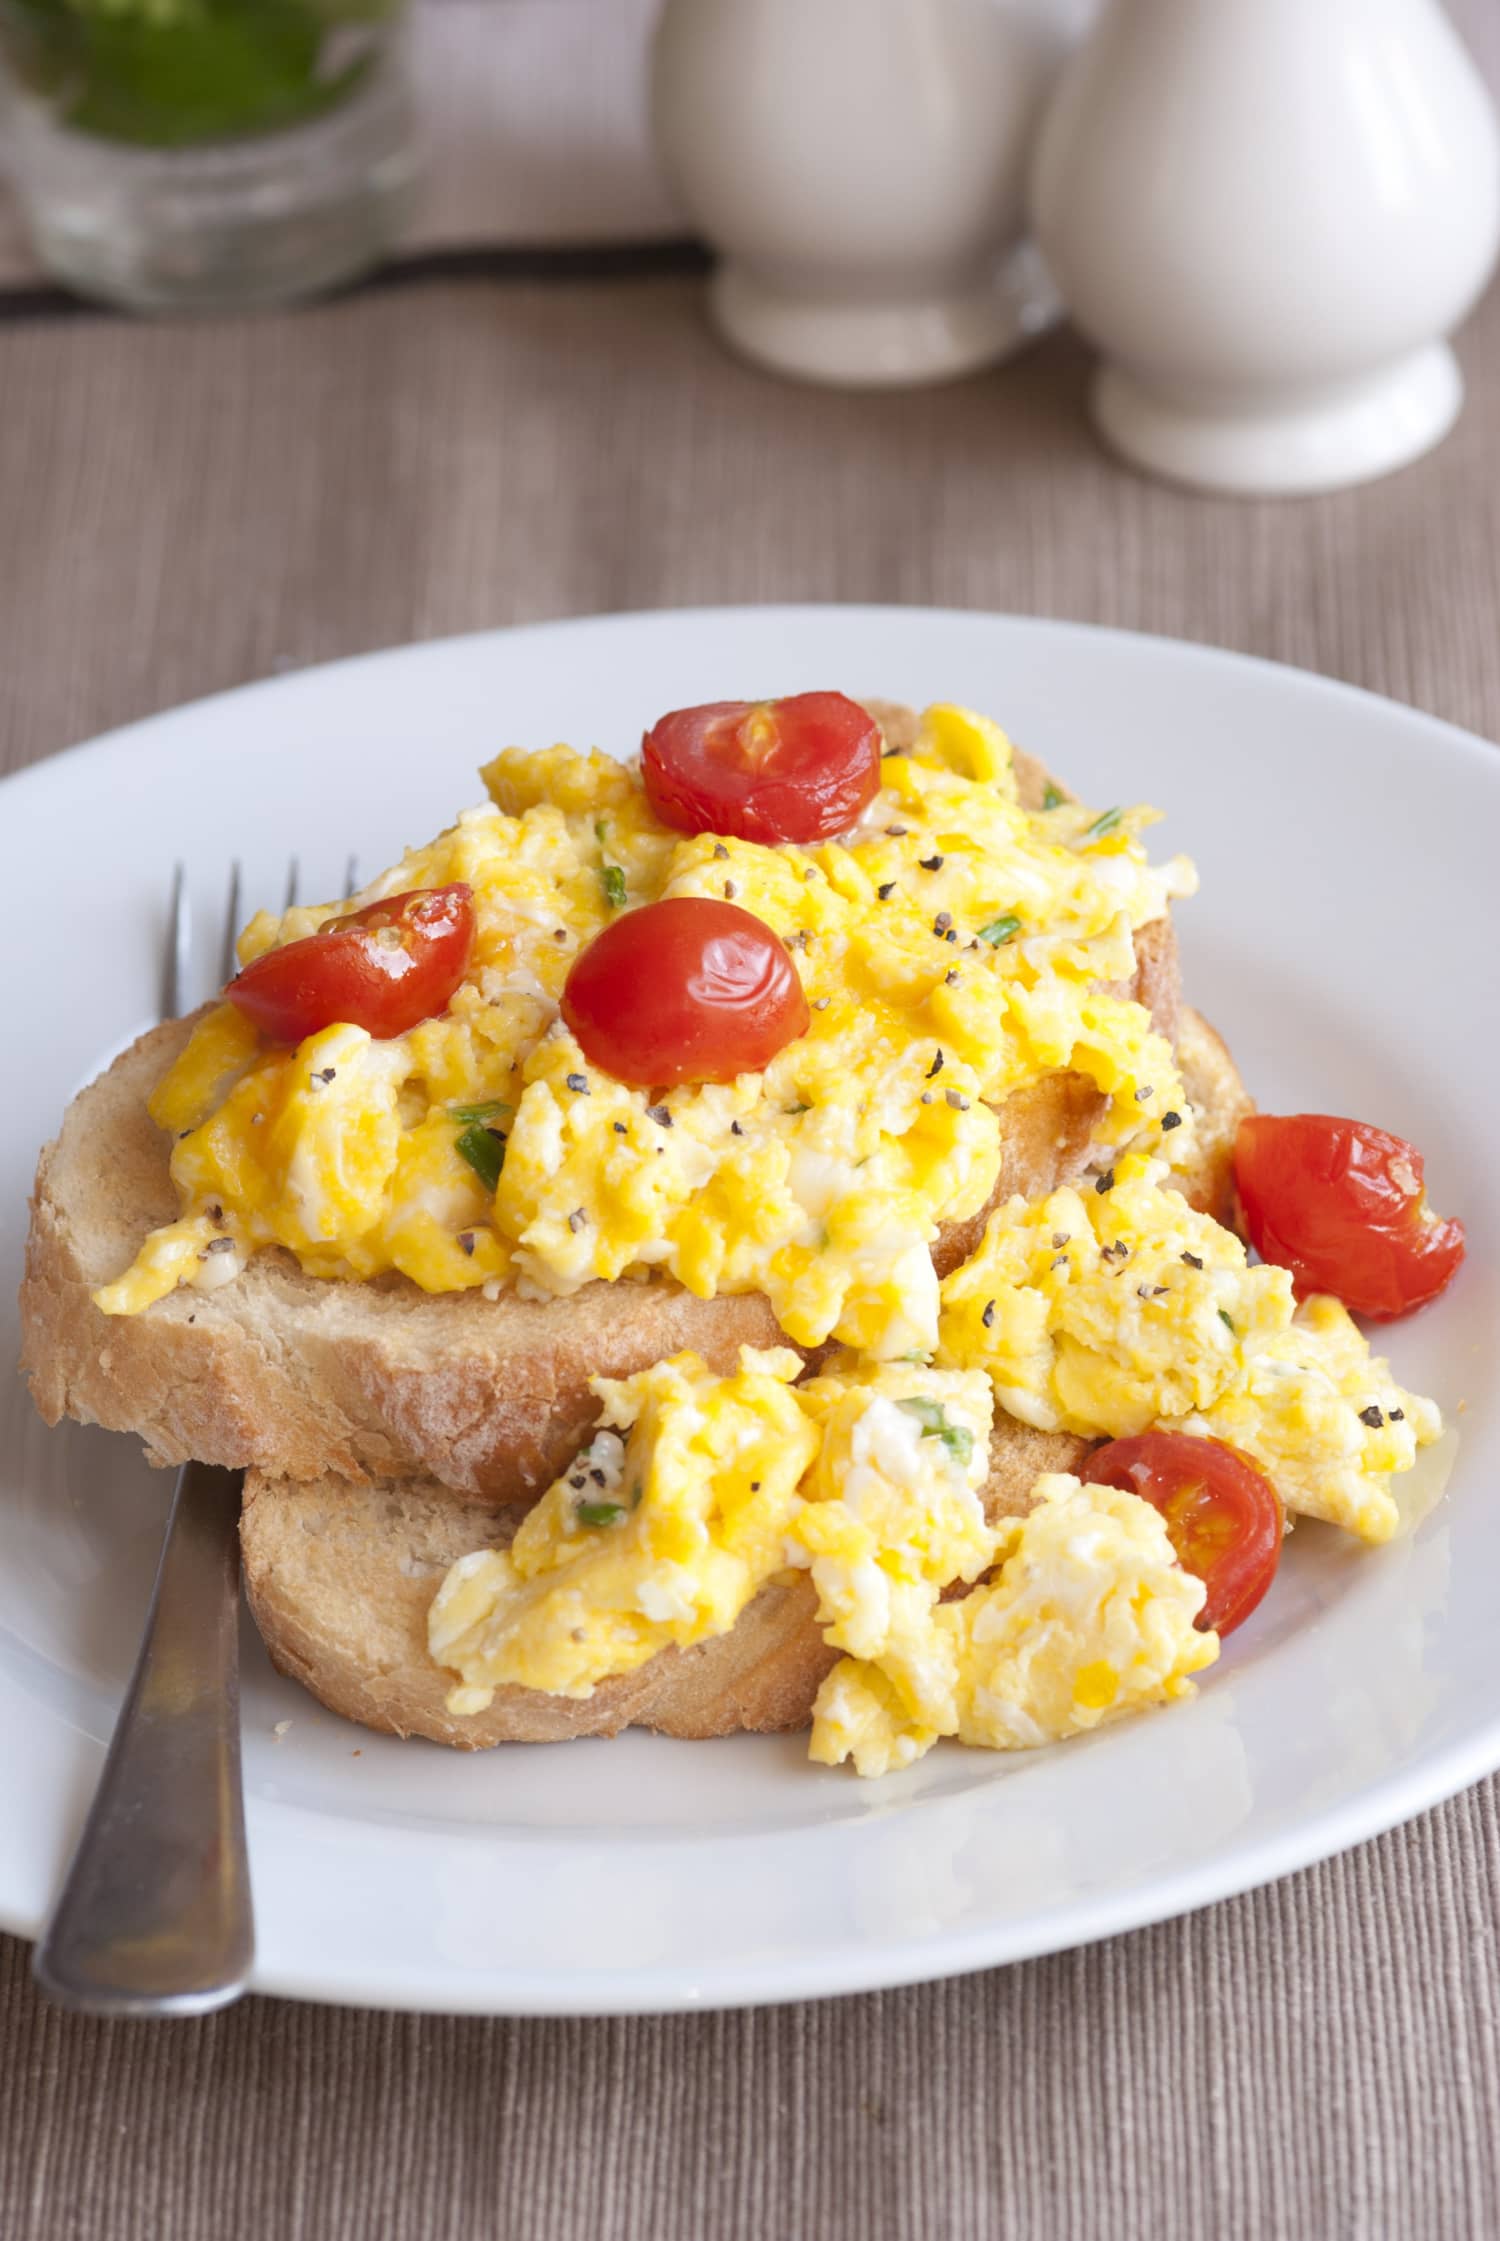 Avoid These 5 Common Mistakes When Making Scrambled Eggs | Kitchn